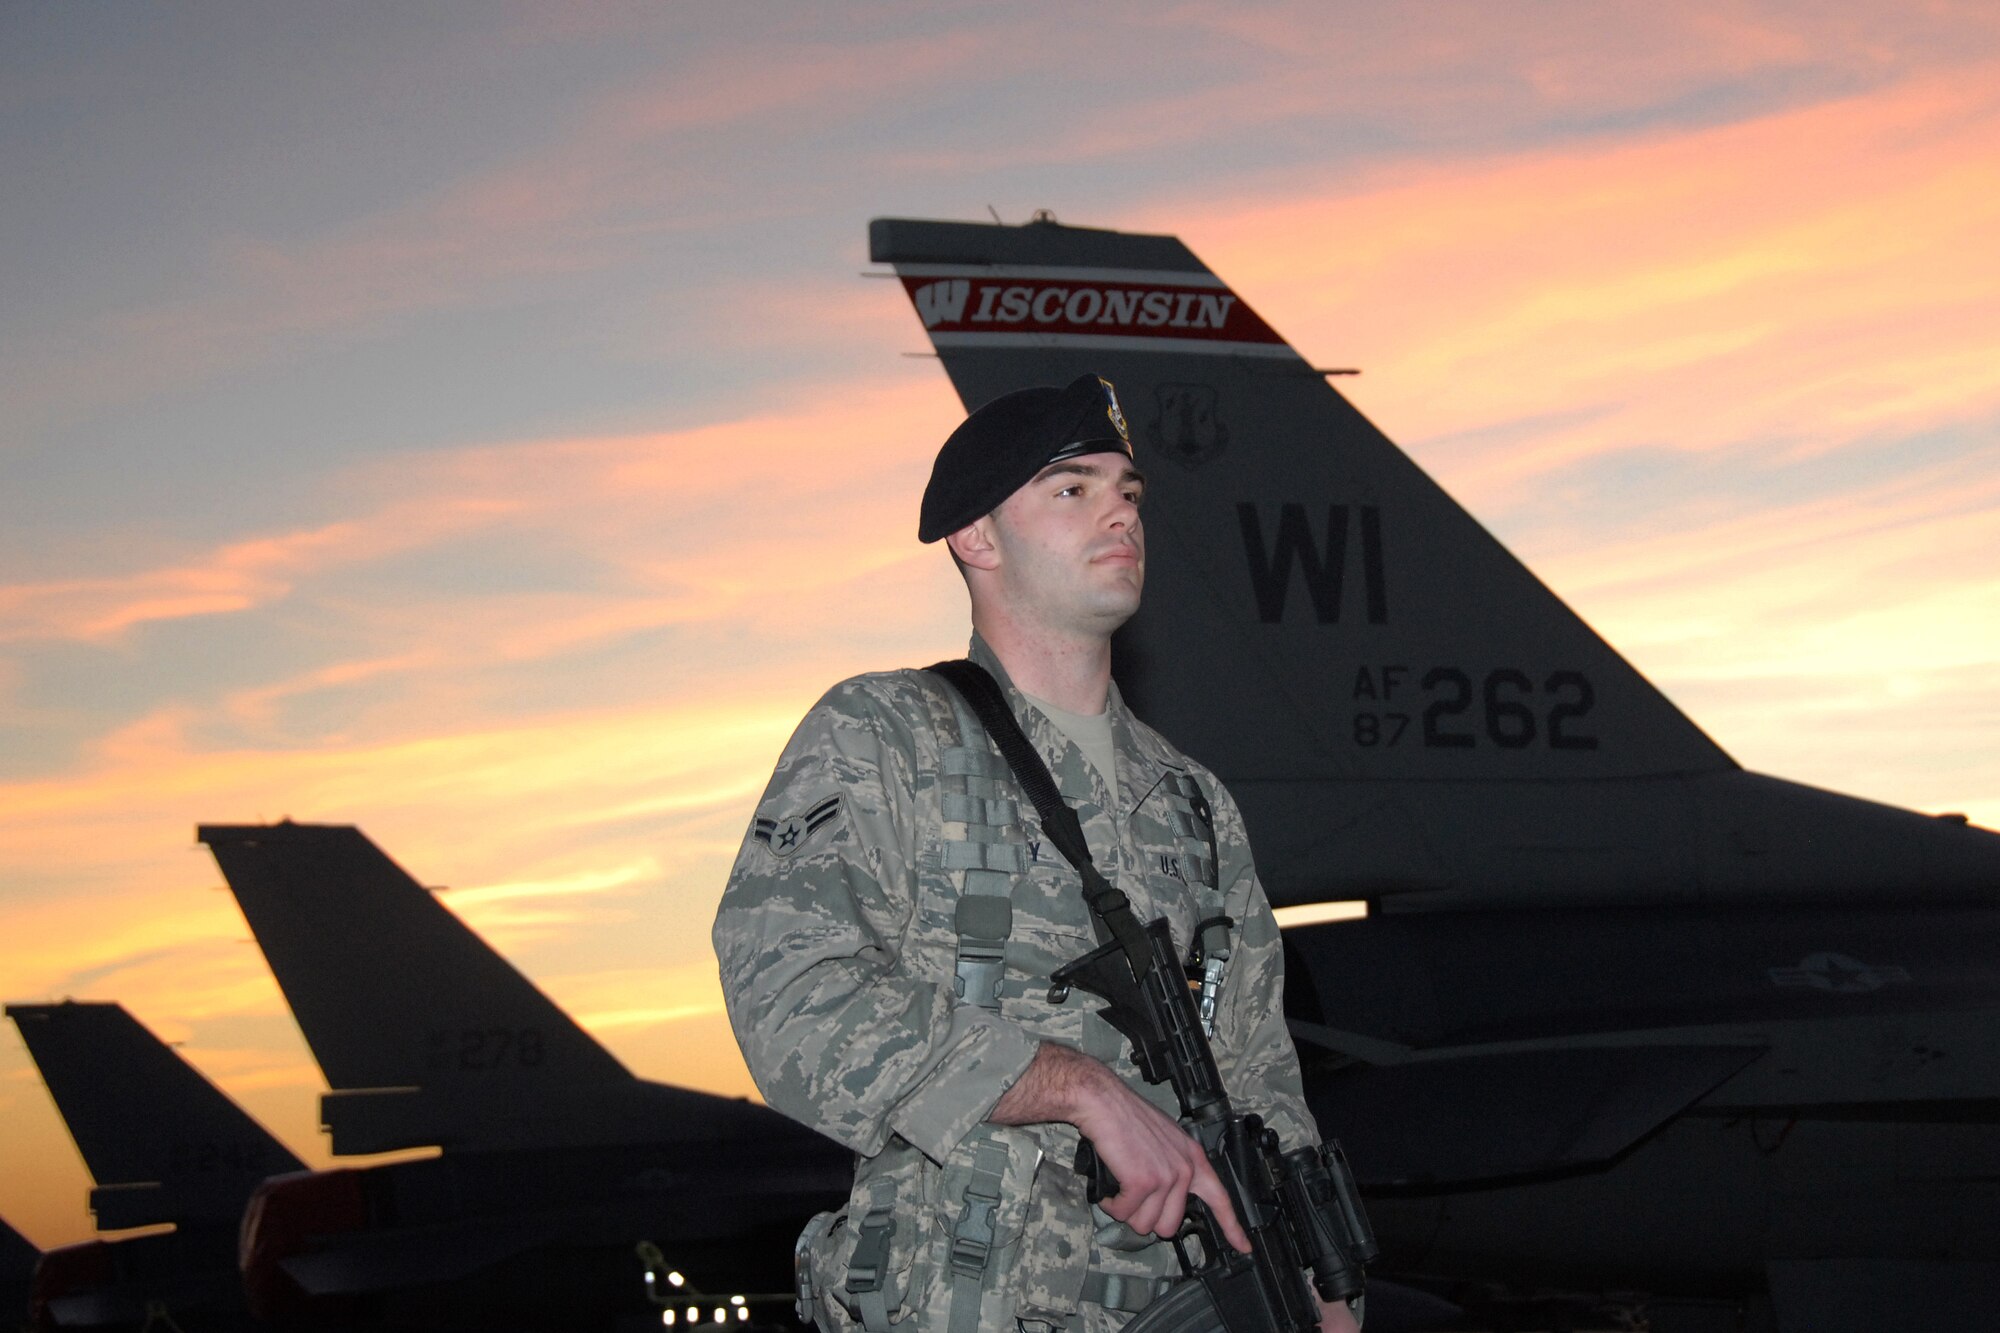 Airman 1st Class Justin Padley, a member of the 115th Fighter Wing security forces, stands guard March 23, 2010, at Naval Air Station Key West, keeping a watchful eye on F-16C Fighting Falcons as he and close to 145 Airmen of the 115th FW in Madison, Wis., spent approximately two weeks at NAS gaining valuable training as their F-16 Flying Falcons sparred against Navy F-18 Super Hornets and F-5 Tigers here.  (U.S. Air Force photo by Airman 1st Class Ryan Roth, 115 FW/PA)